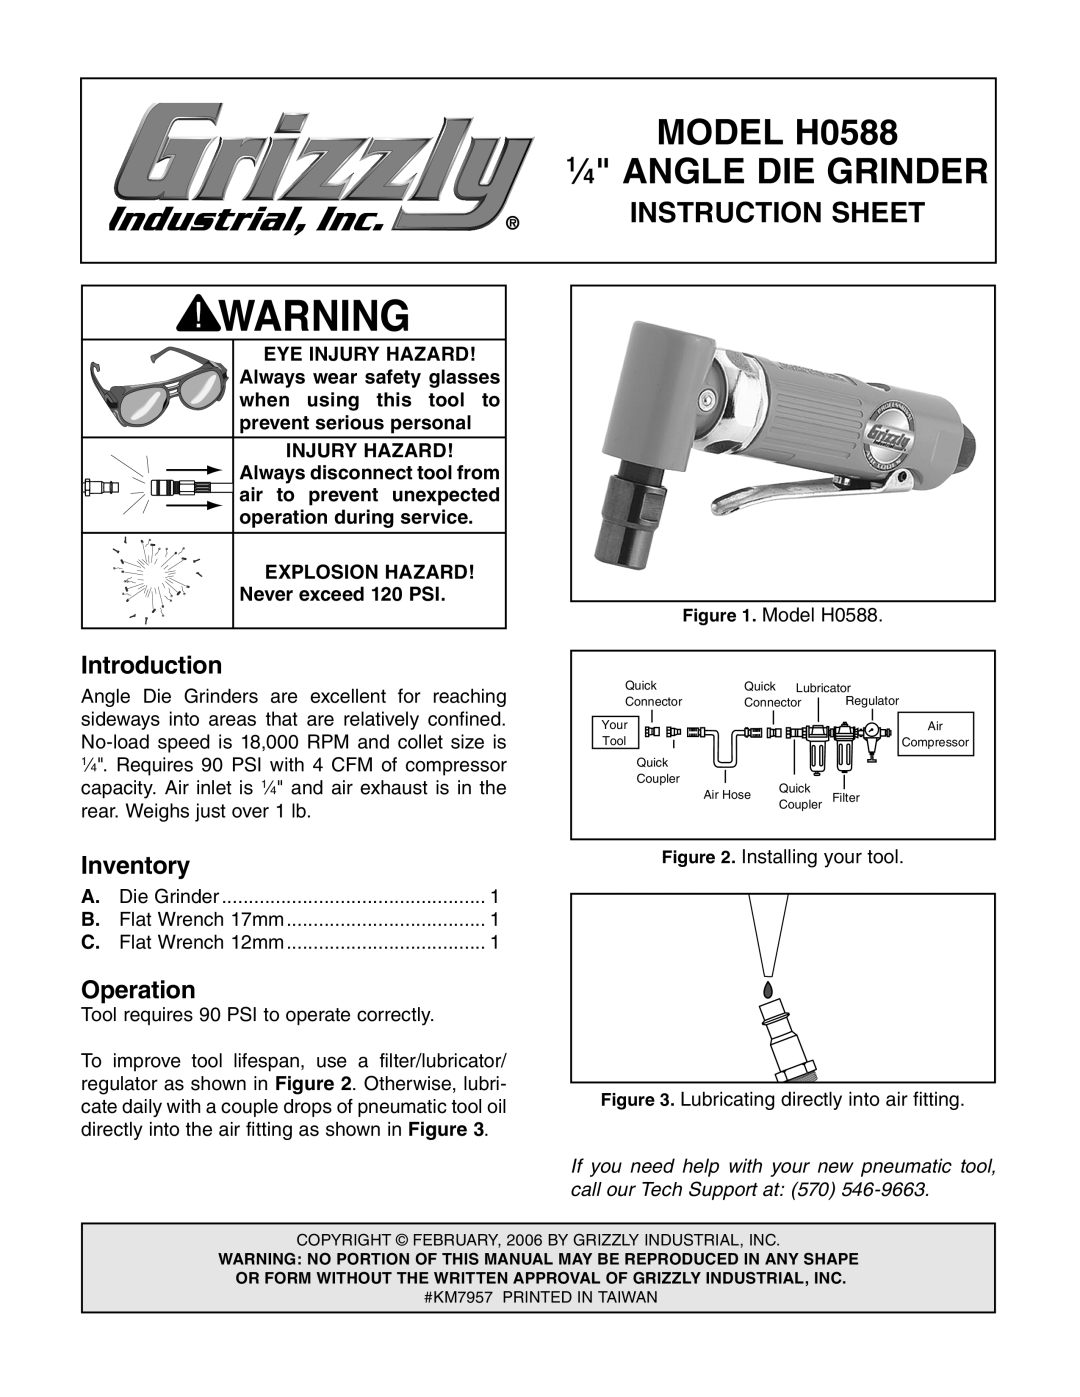 Grizzly instruction sheet MODEL H0588, 1⁄4 ANGLE DIE GRINDER, Instruction Sheet, Introduction, Inventory, Operation 